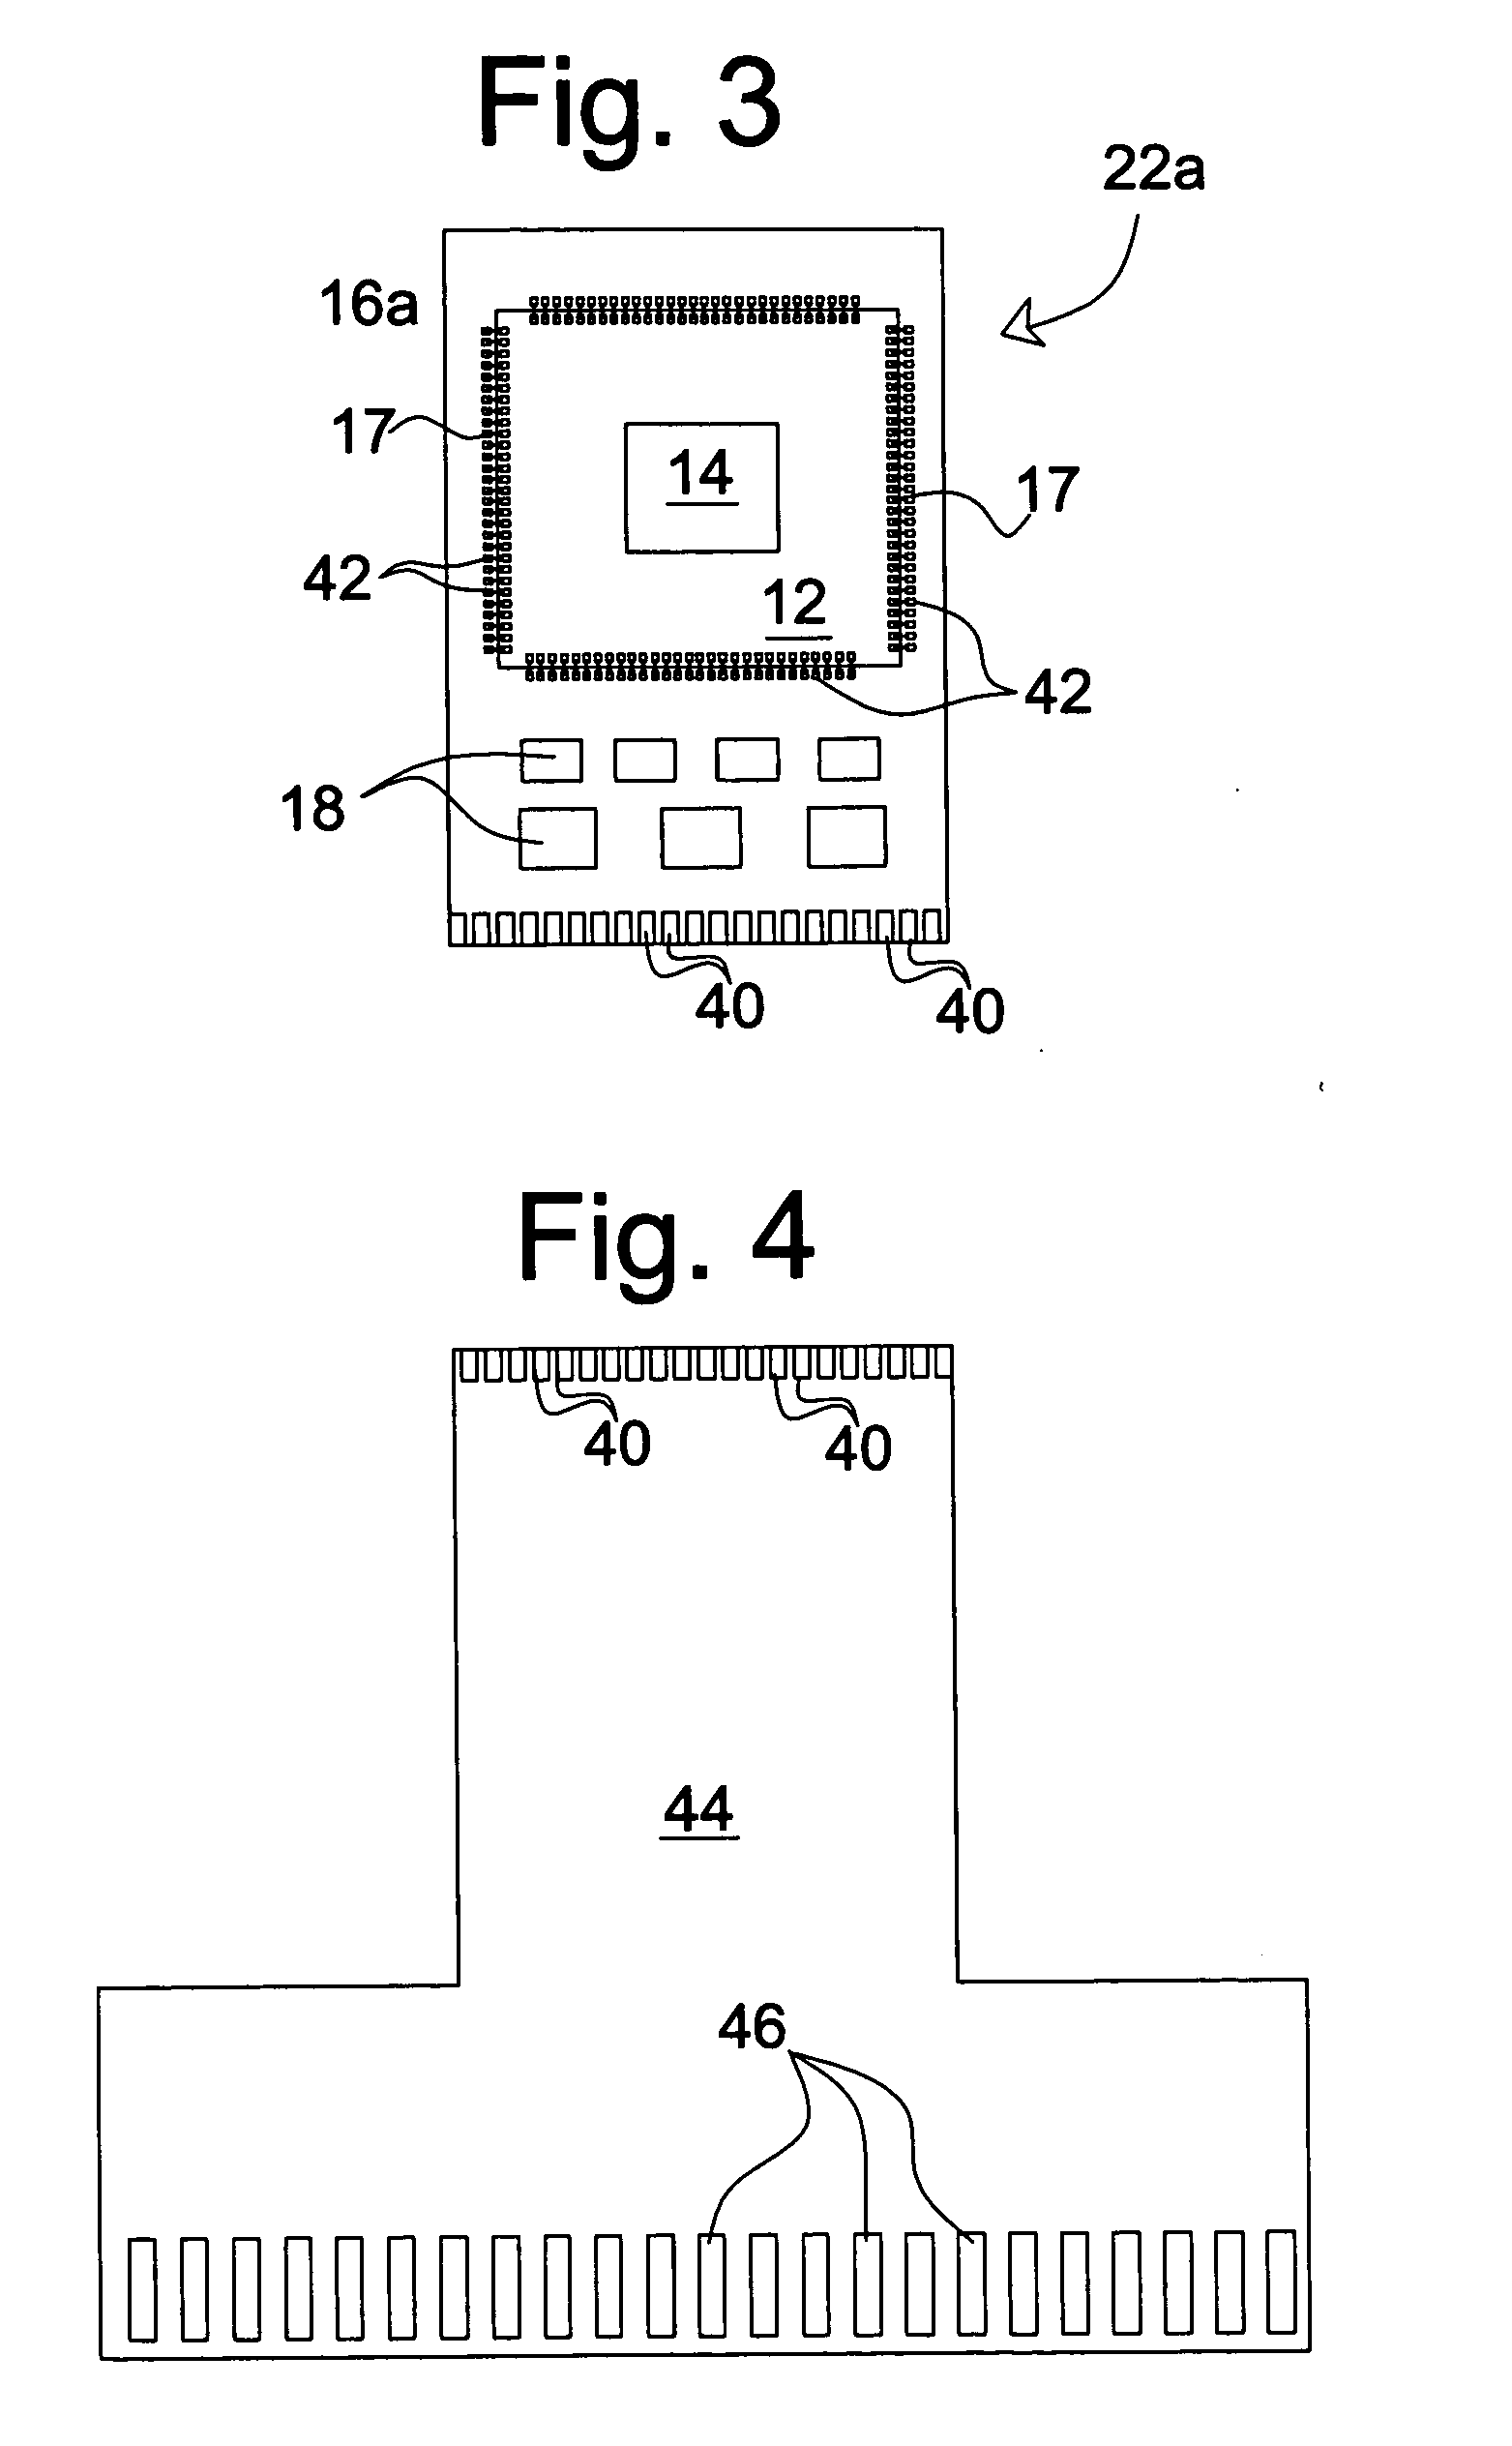 Integrated lens and chip assembly for a digital camera